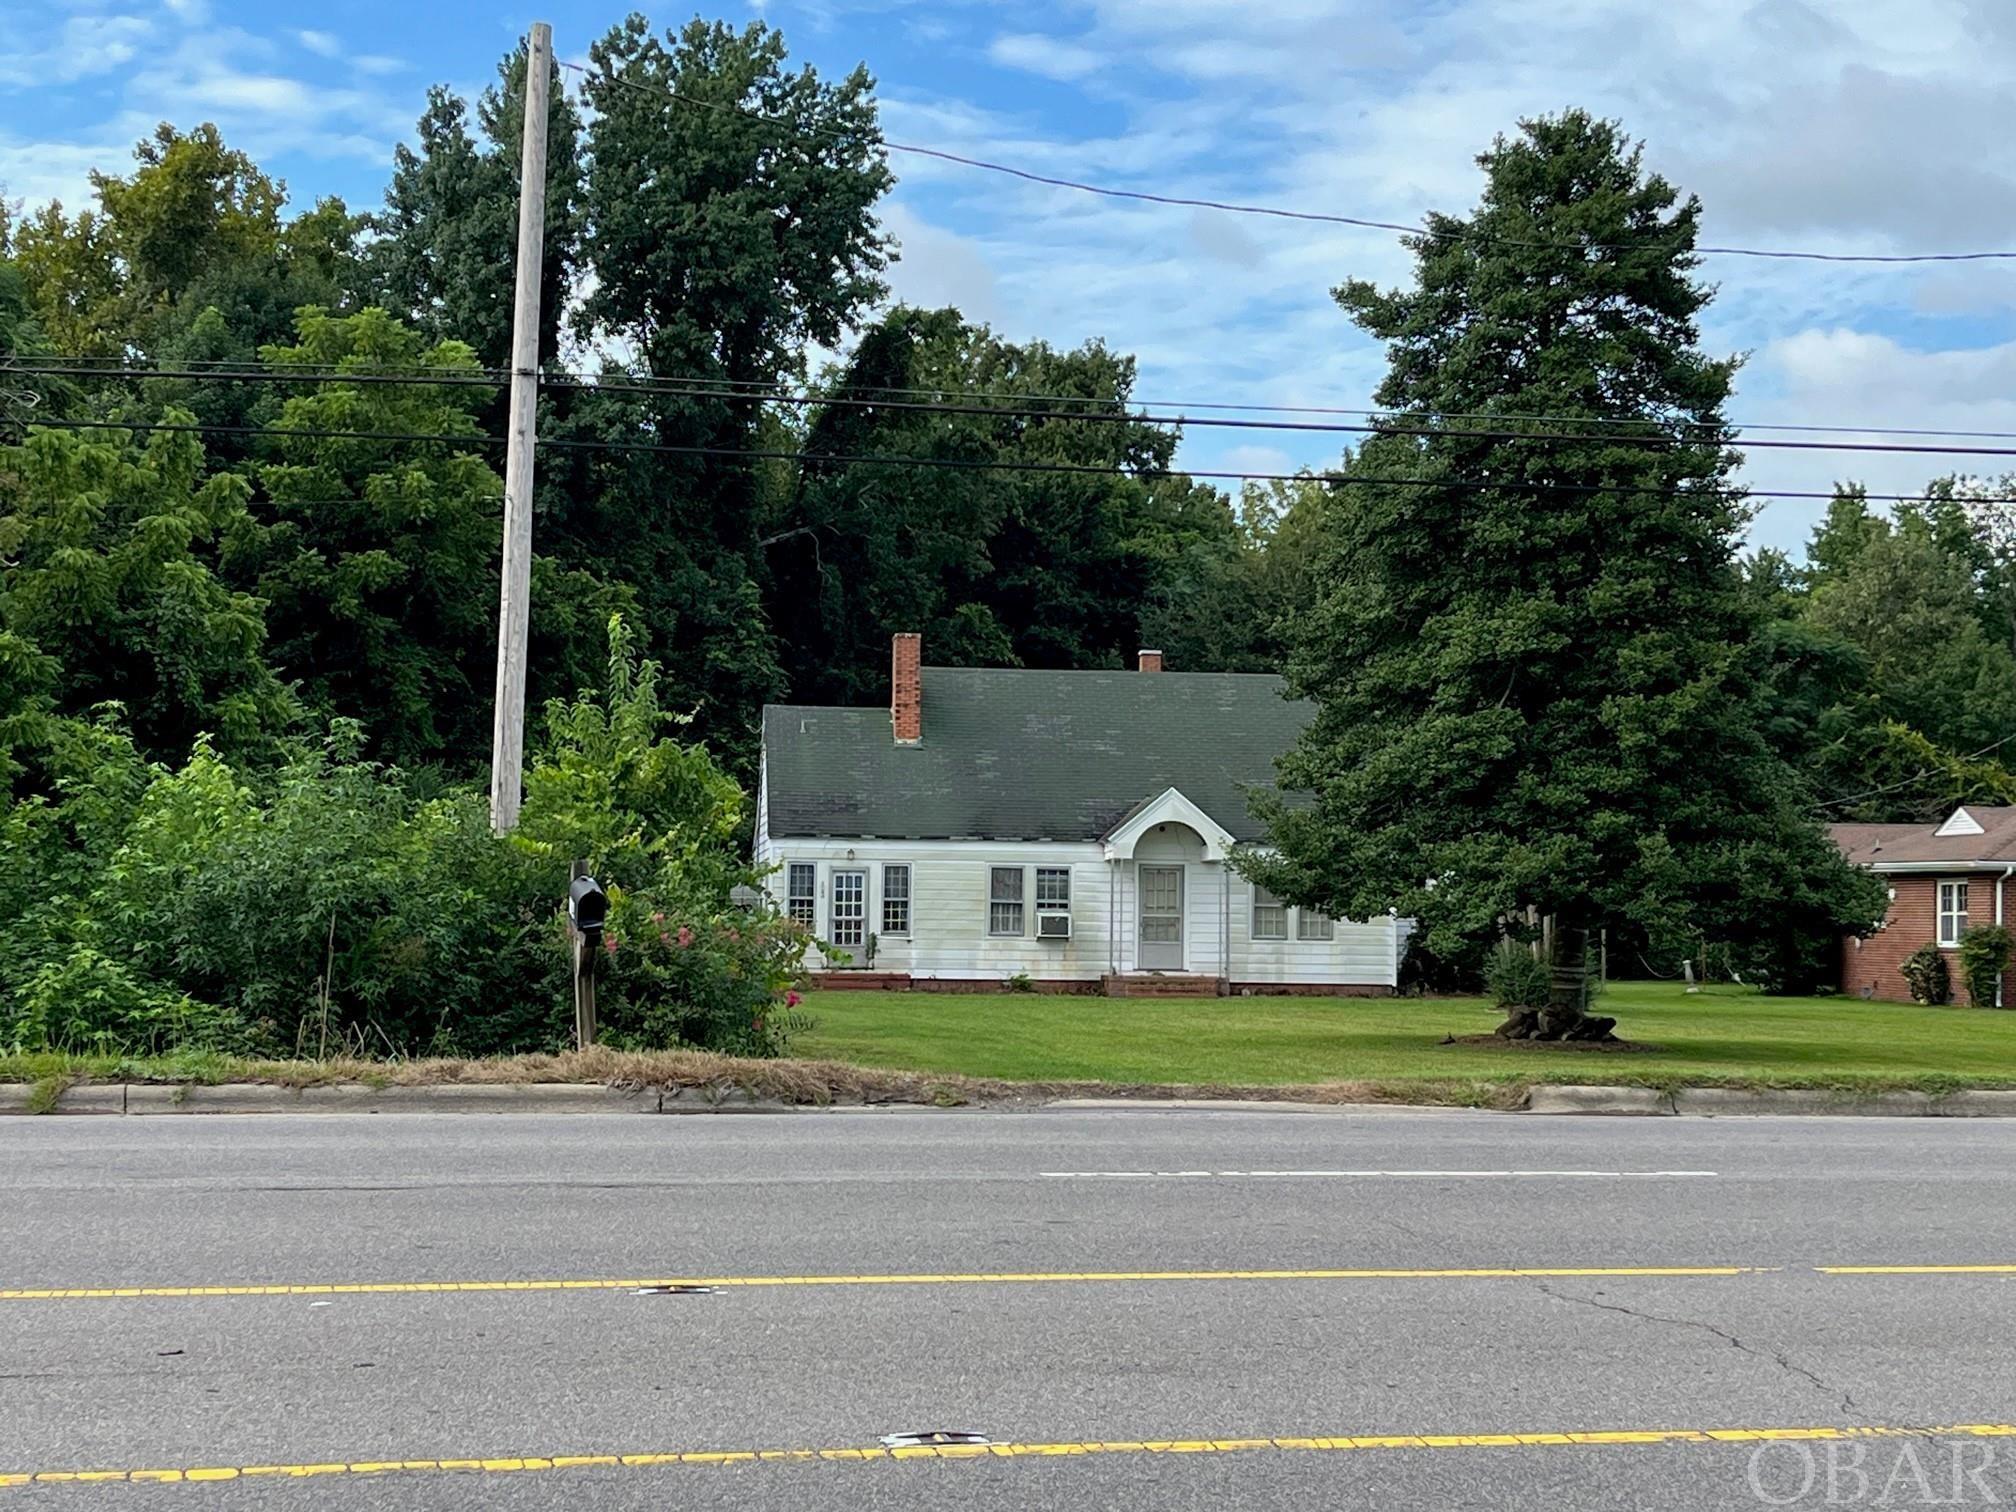 Zone HB (Highway Business) gives this parcel many possibilities. Great visibility located on a four lane highway. Can no longer be used as single family residential. There is a gravesite on property along with some swamp land.